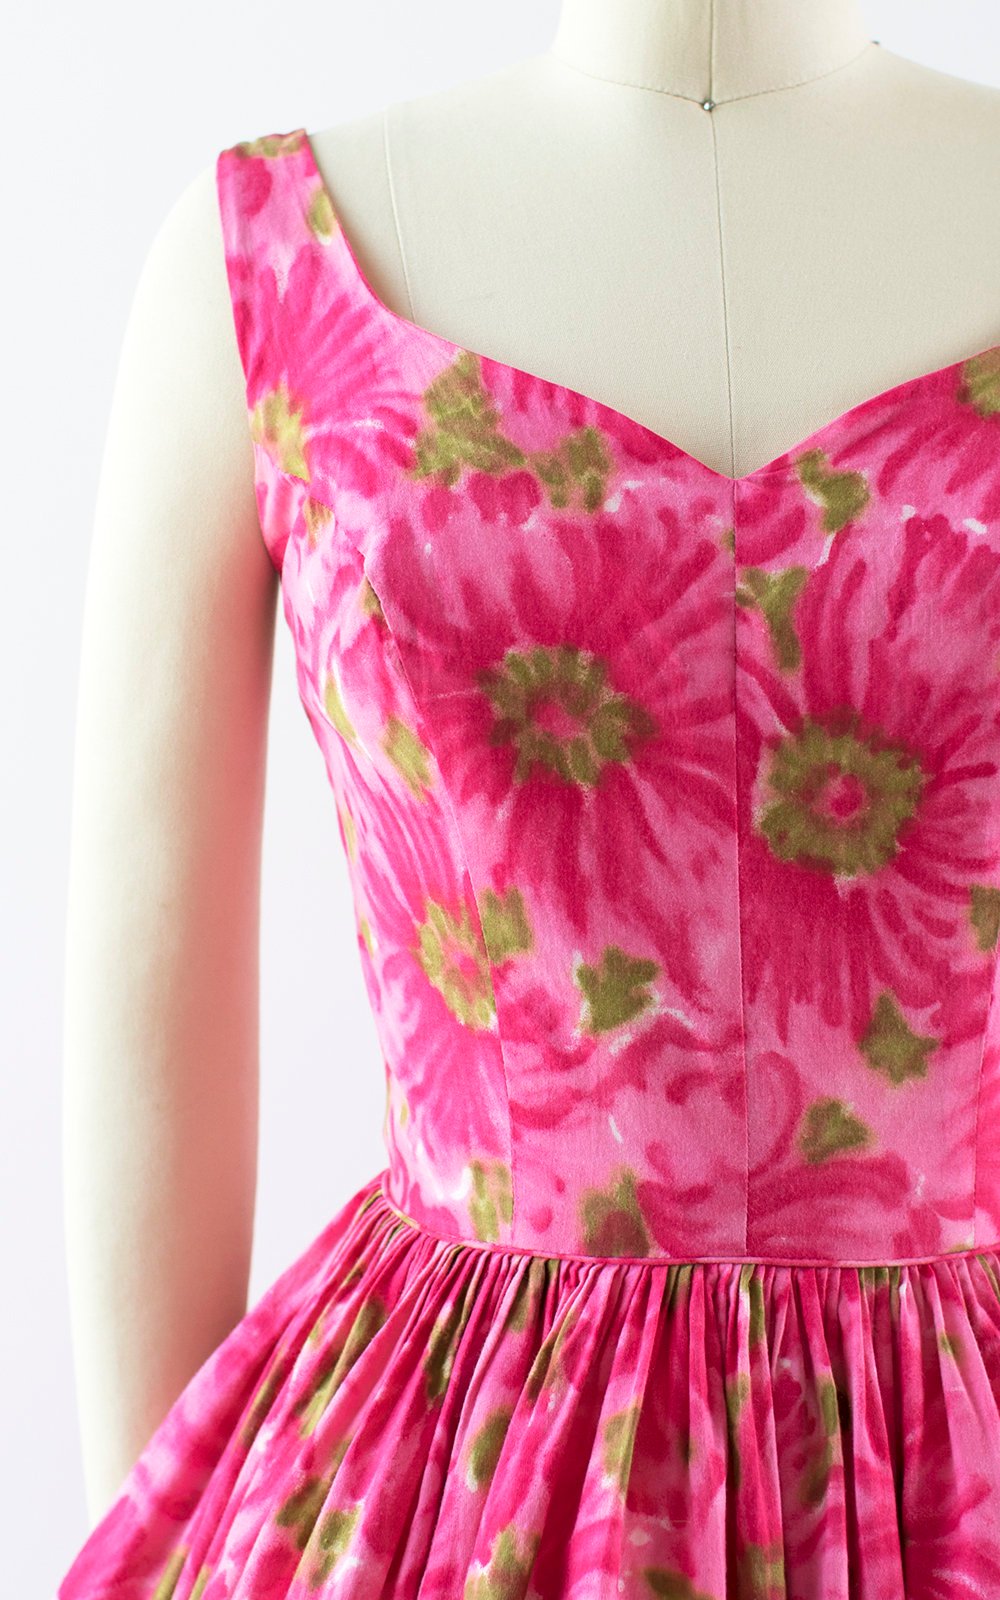 Vintage 1950s Dress | 50s Hot Pink Floral Cotton Sundress Full Skirt Day Dress (x-small)